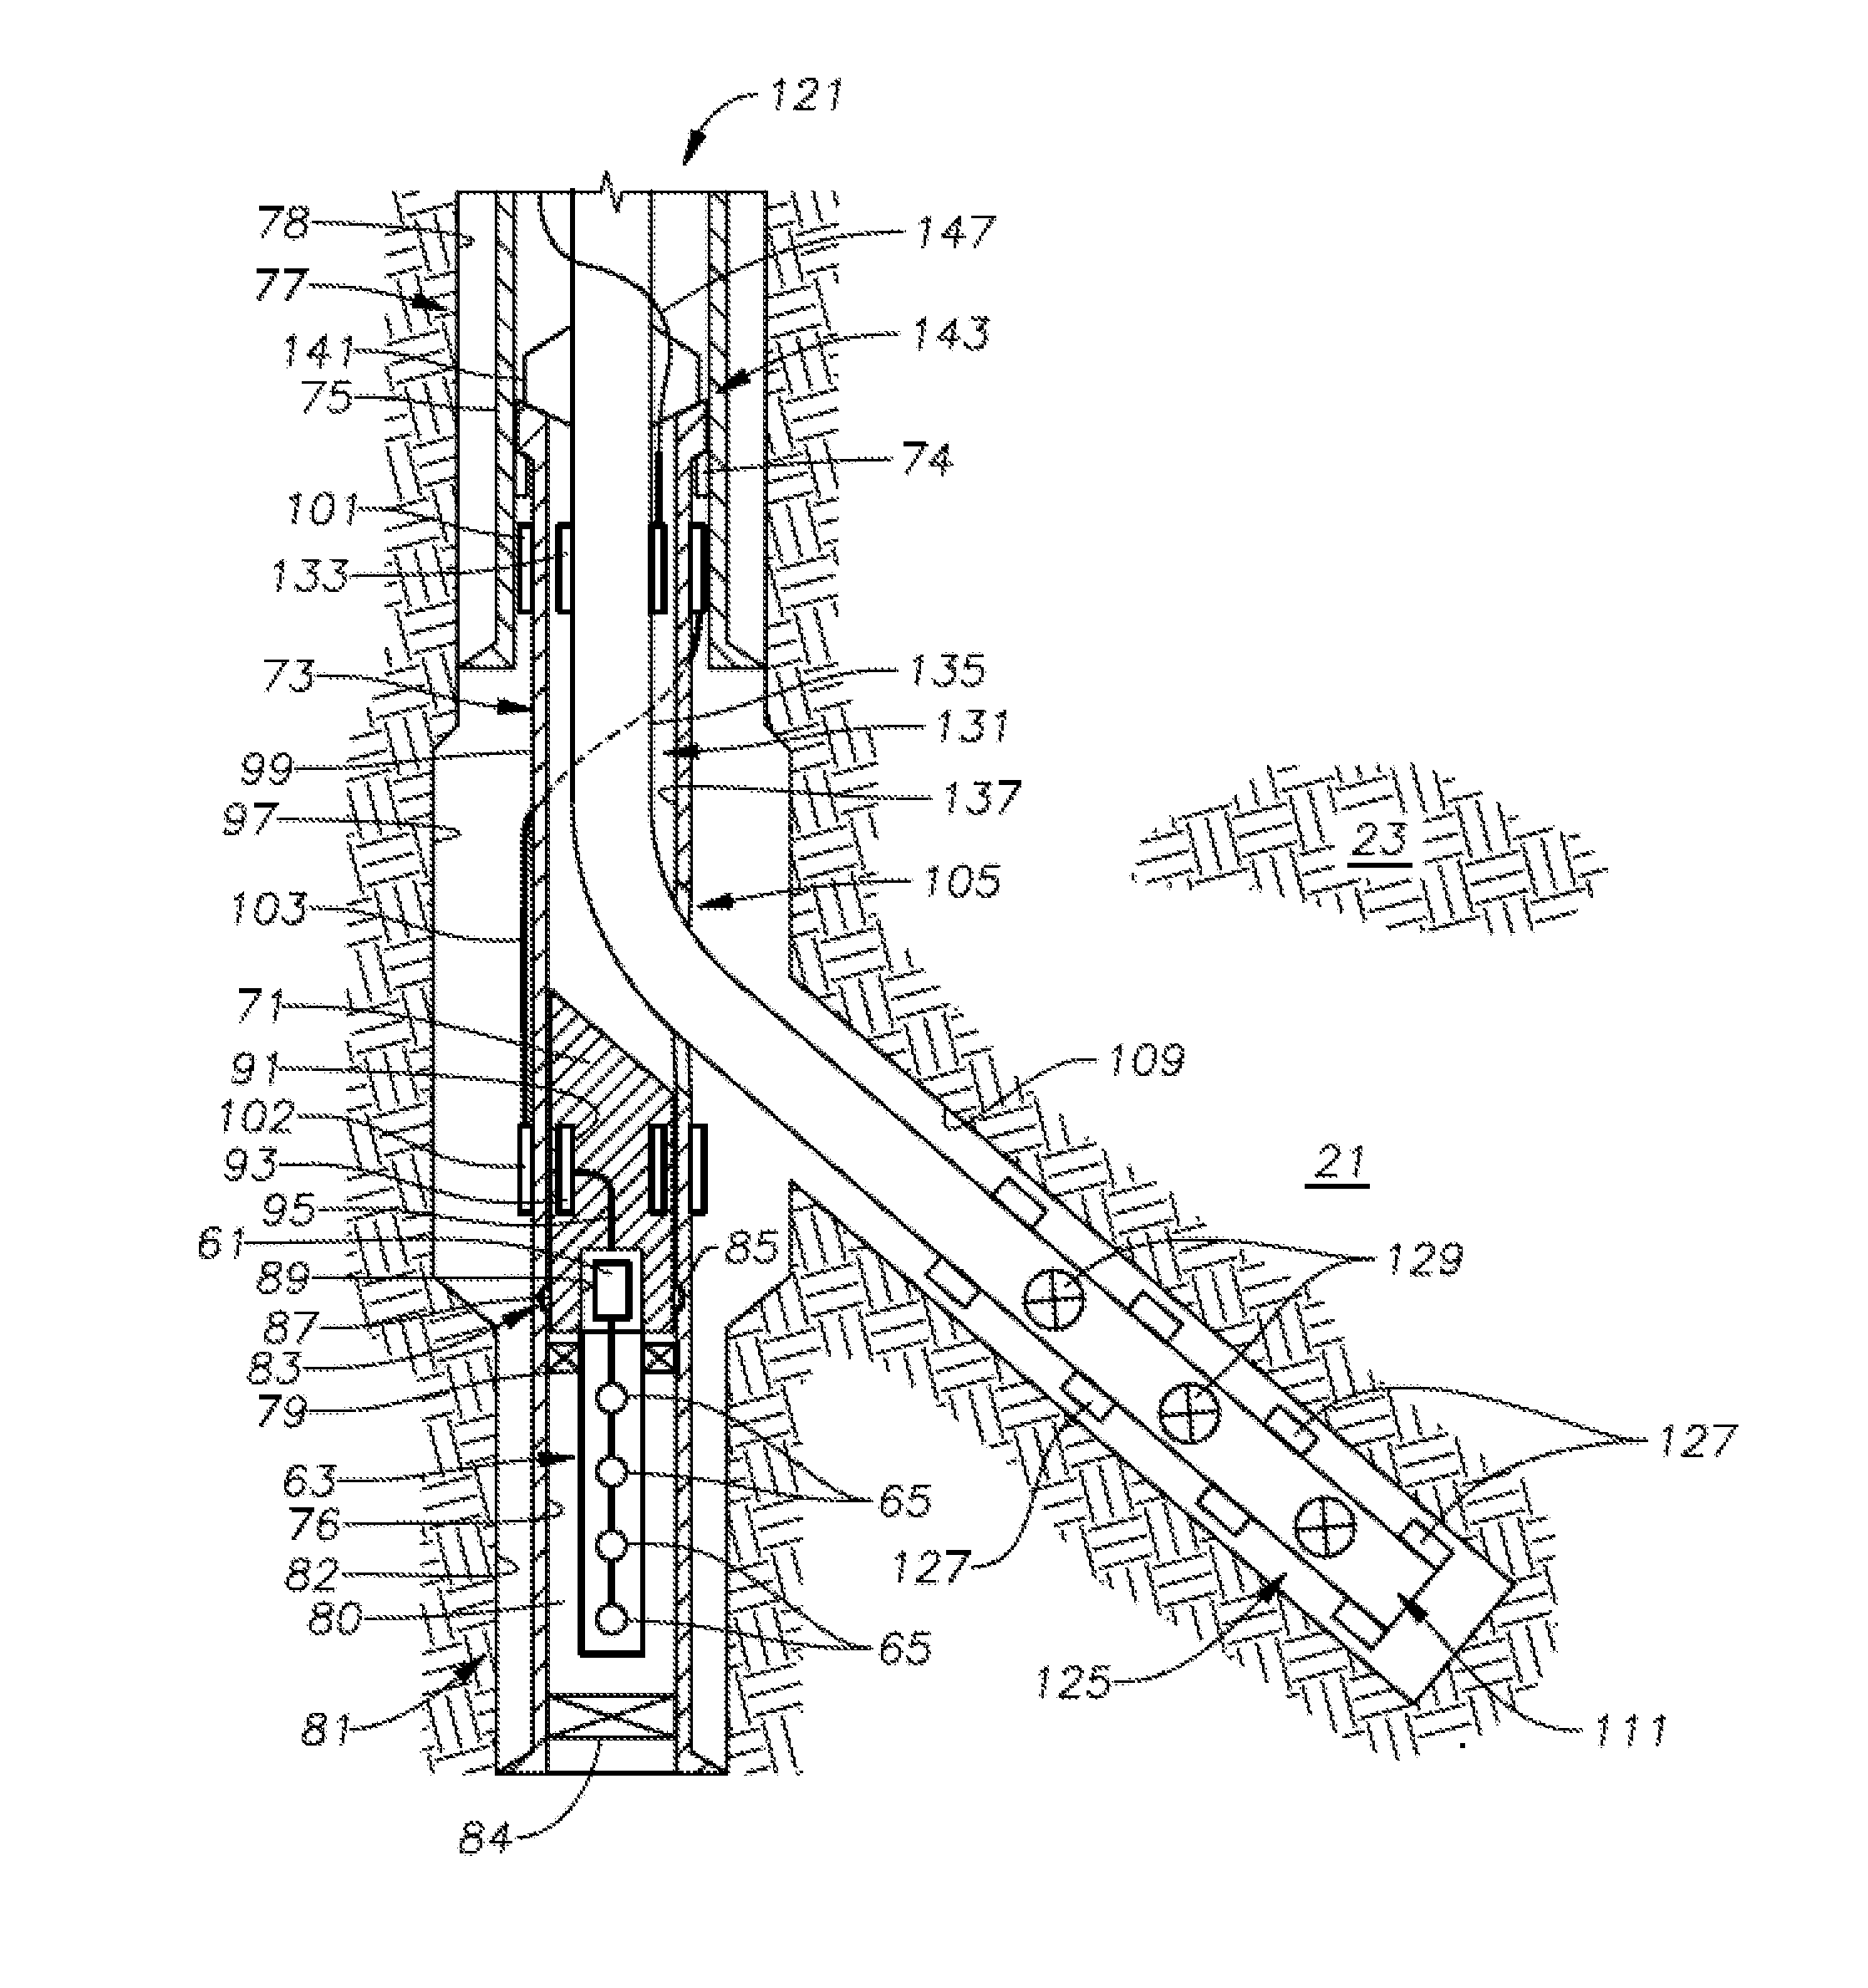 Method for real-time monitoring and transmitting hydraulic fracture seismic events to surface using the pilot hole of the treatment well as the monitoring well